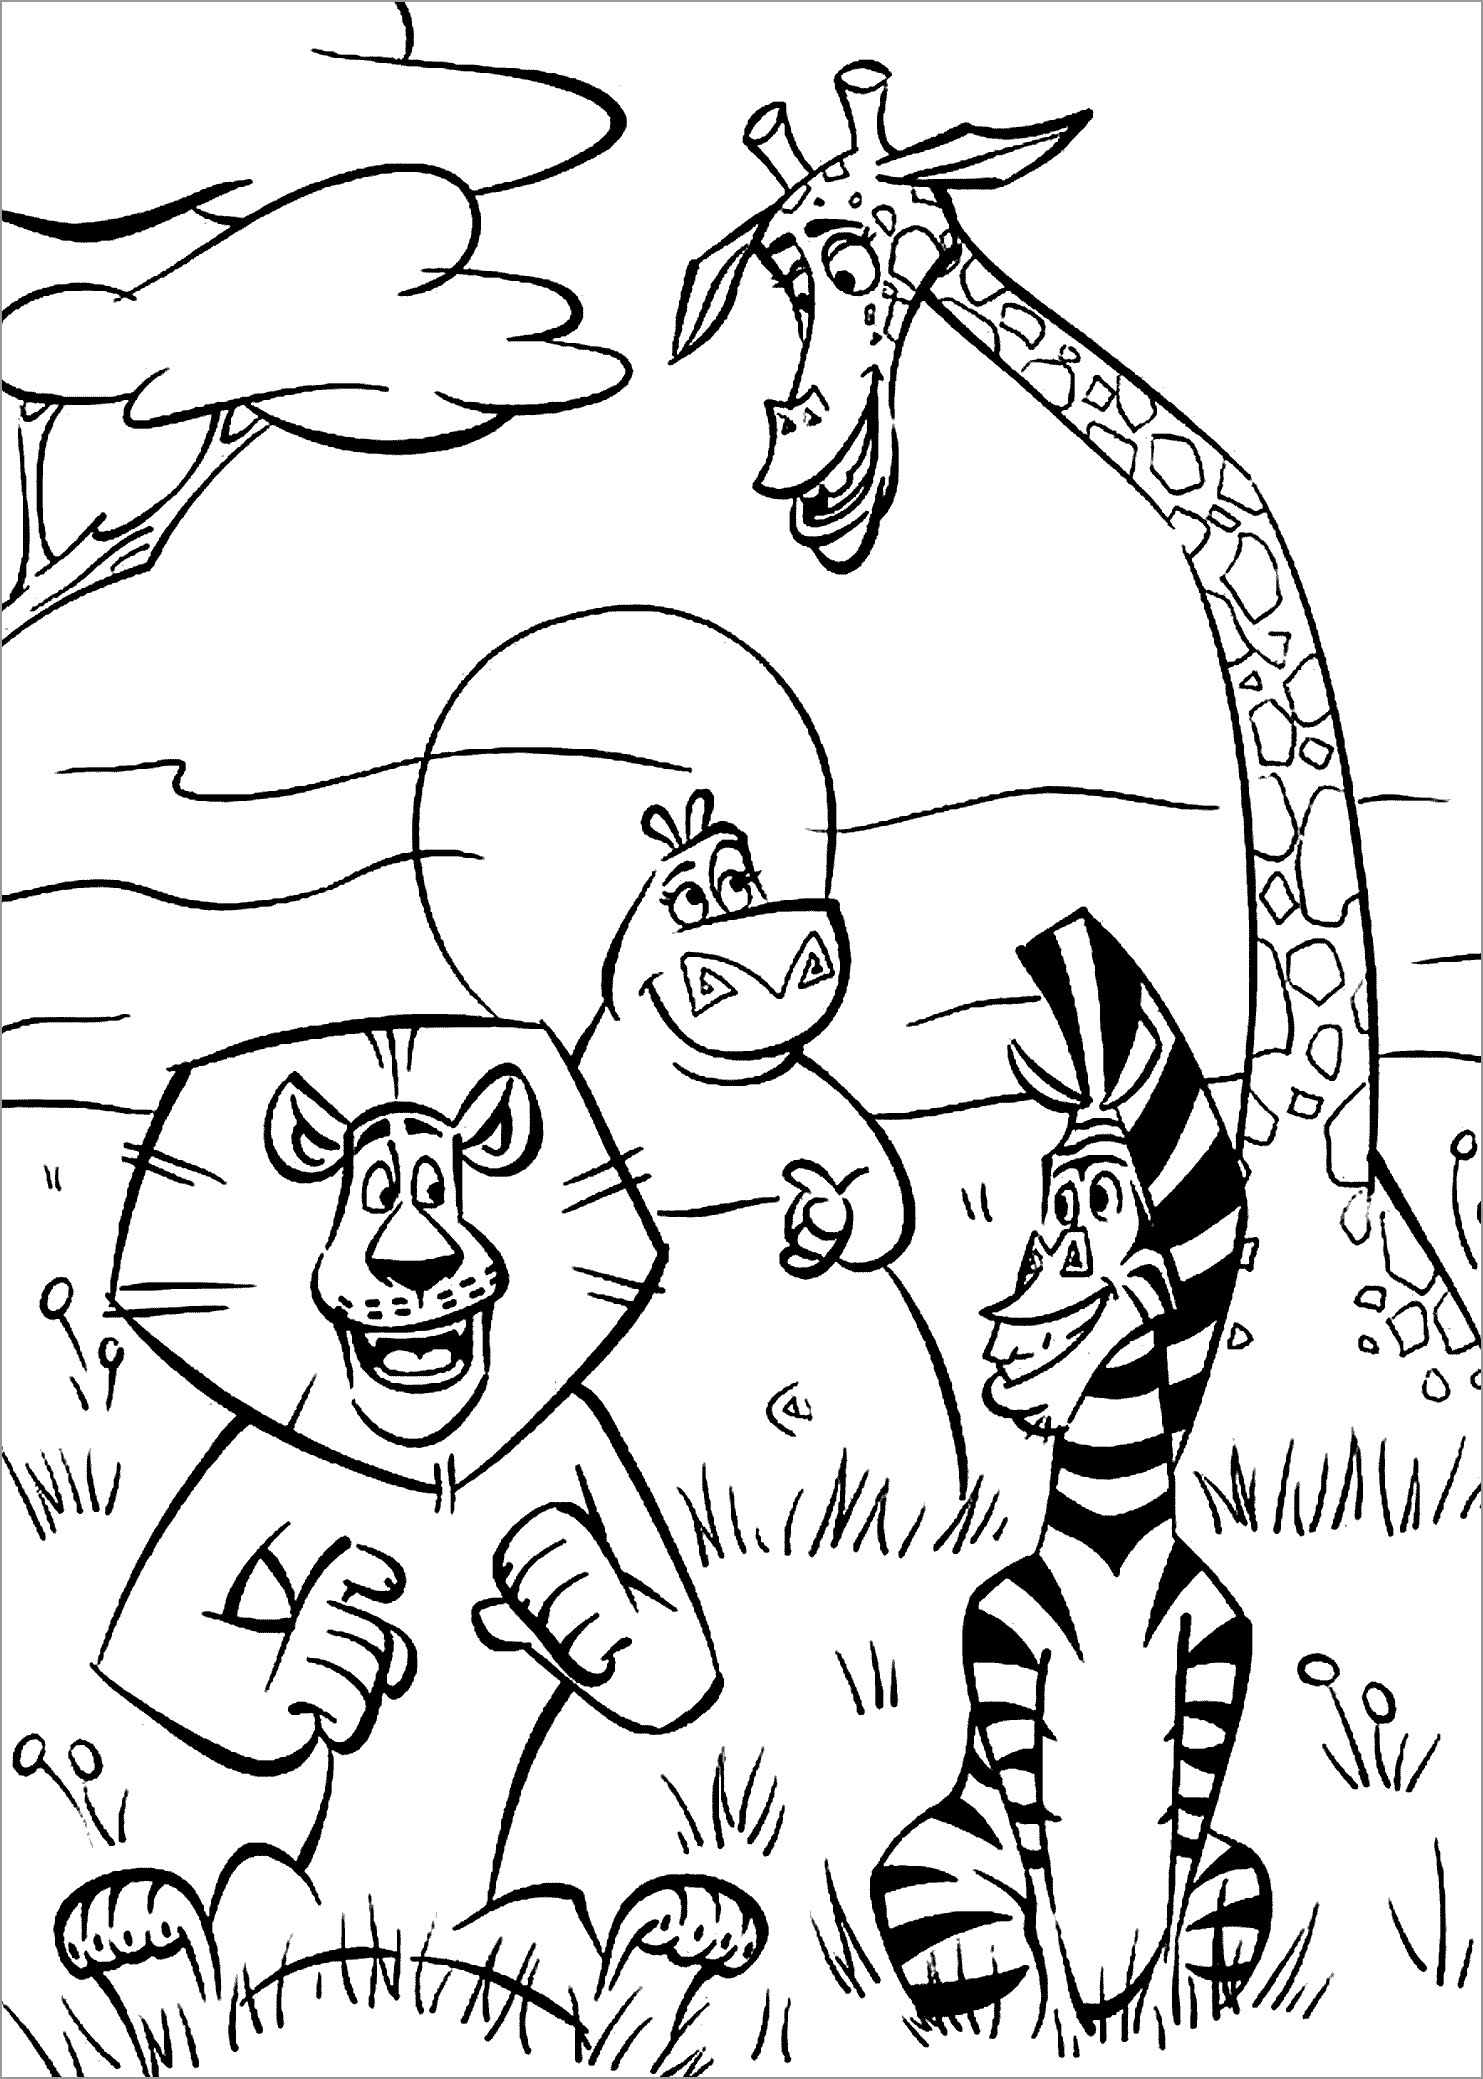 Printable Of Madagascar Animals Coloring Pages for Kids